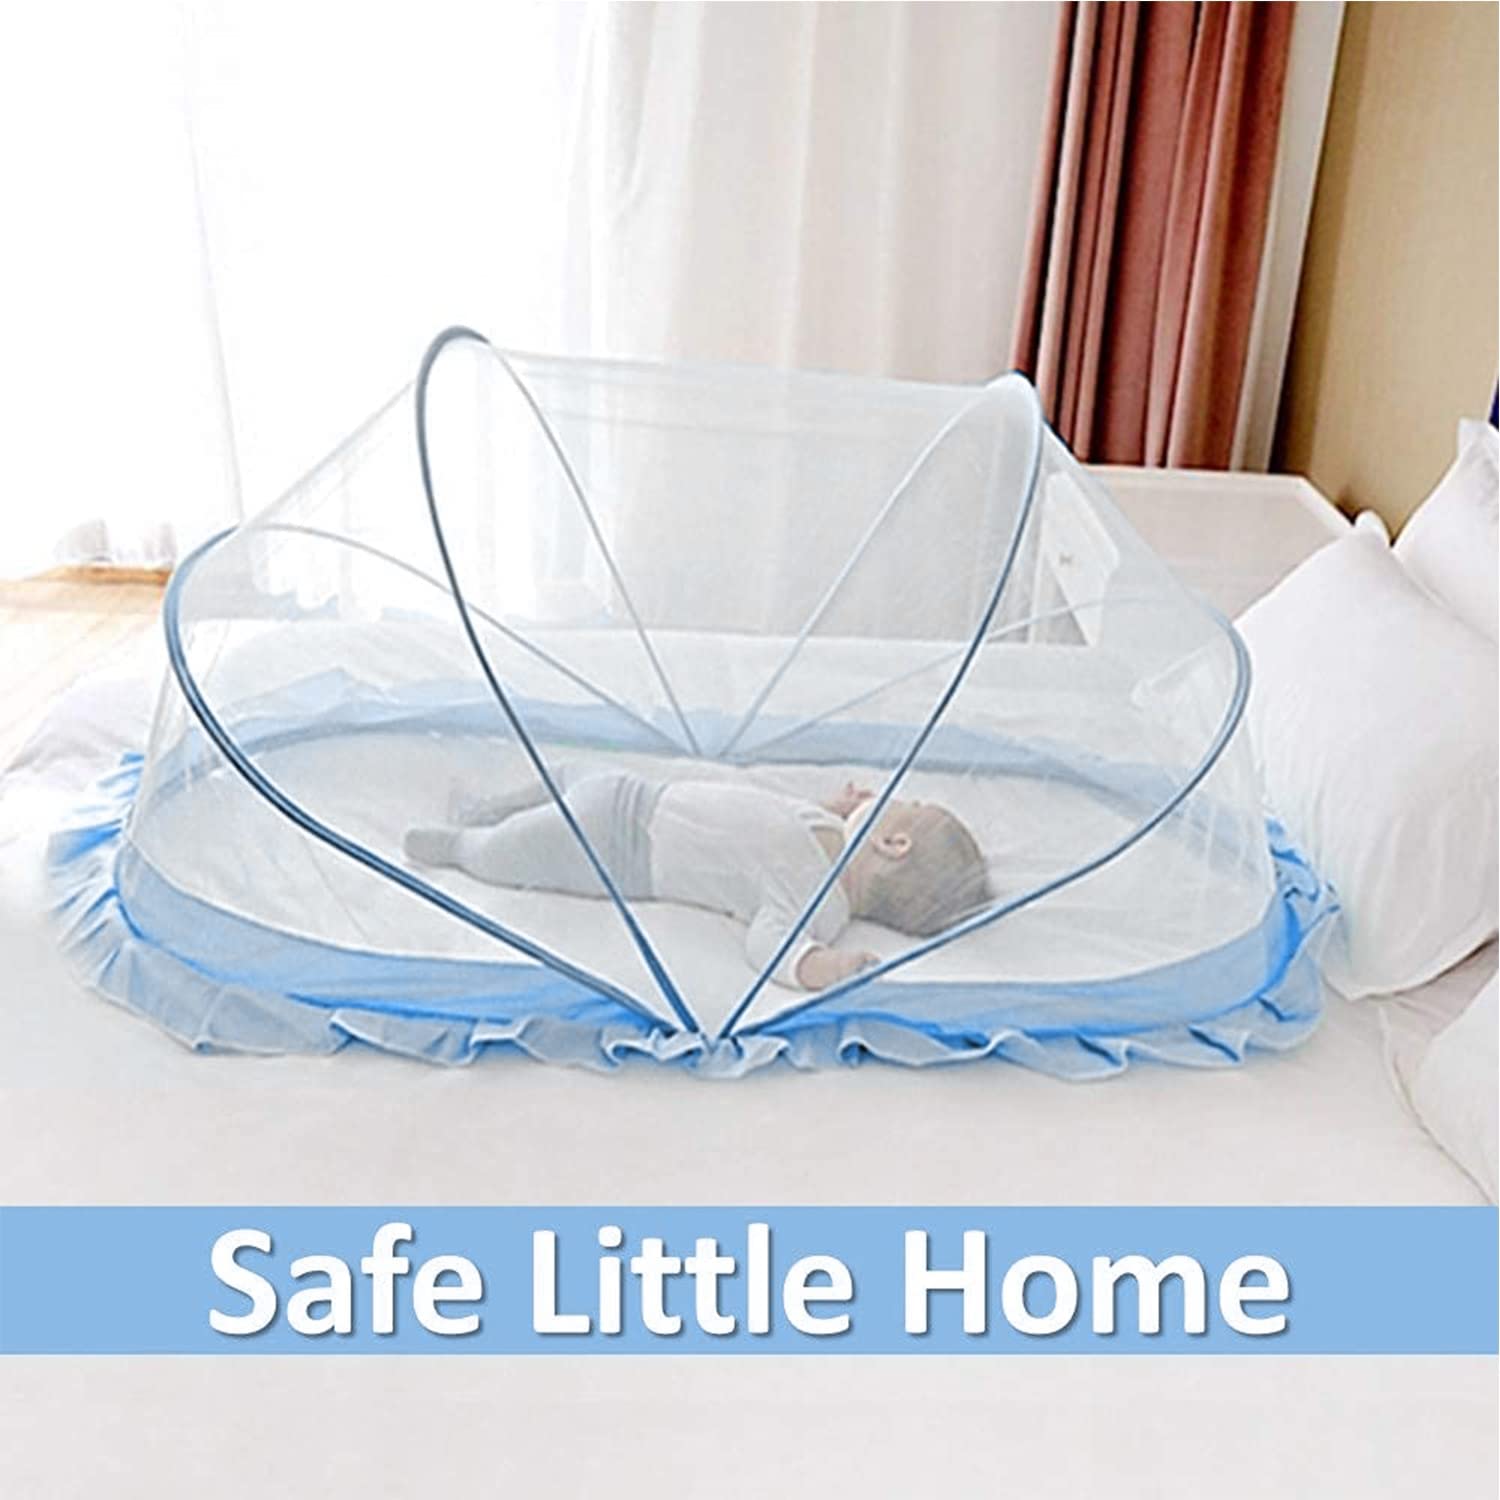 Classic Mosquito Net Baby Mosquito Net | Bottomless Net for Infants, for Safe & Easy Use | Ensures Your Baby's Safe Sleep |135cmX65cmX65cm (0 to 24 Months) - Blue